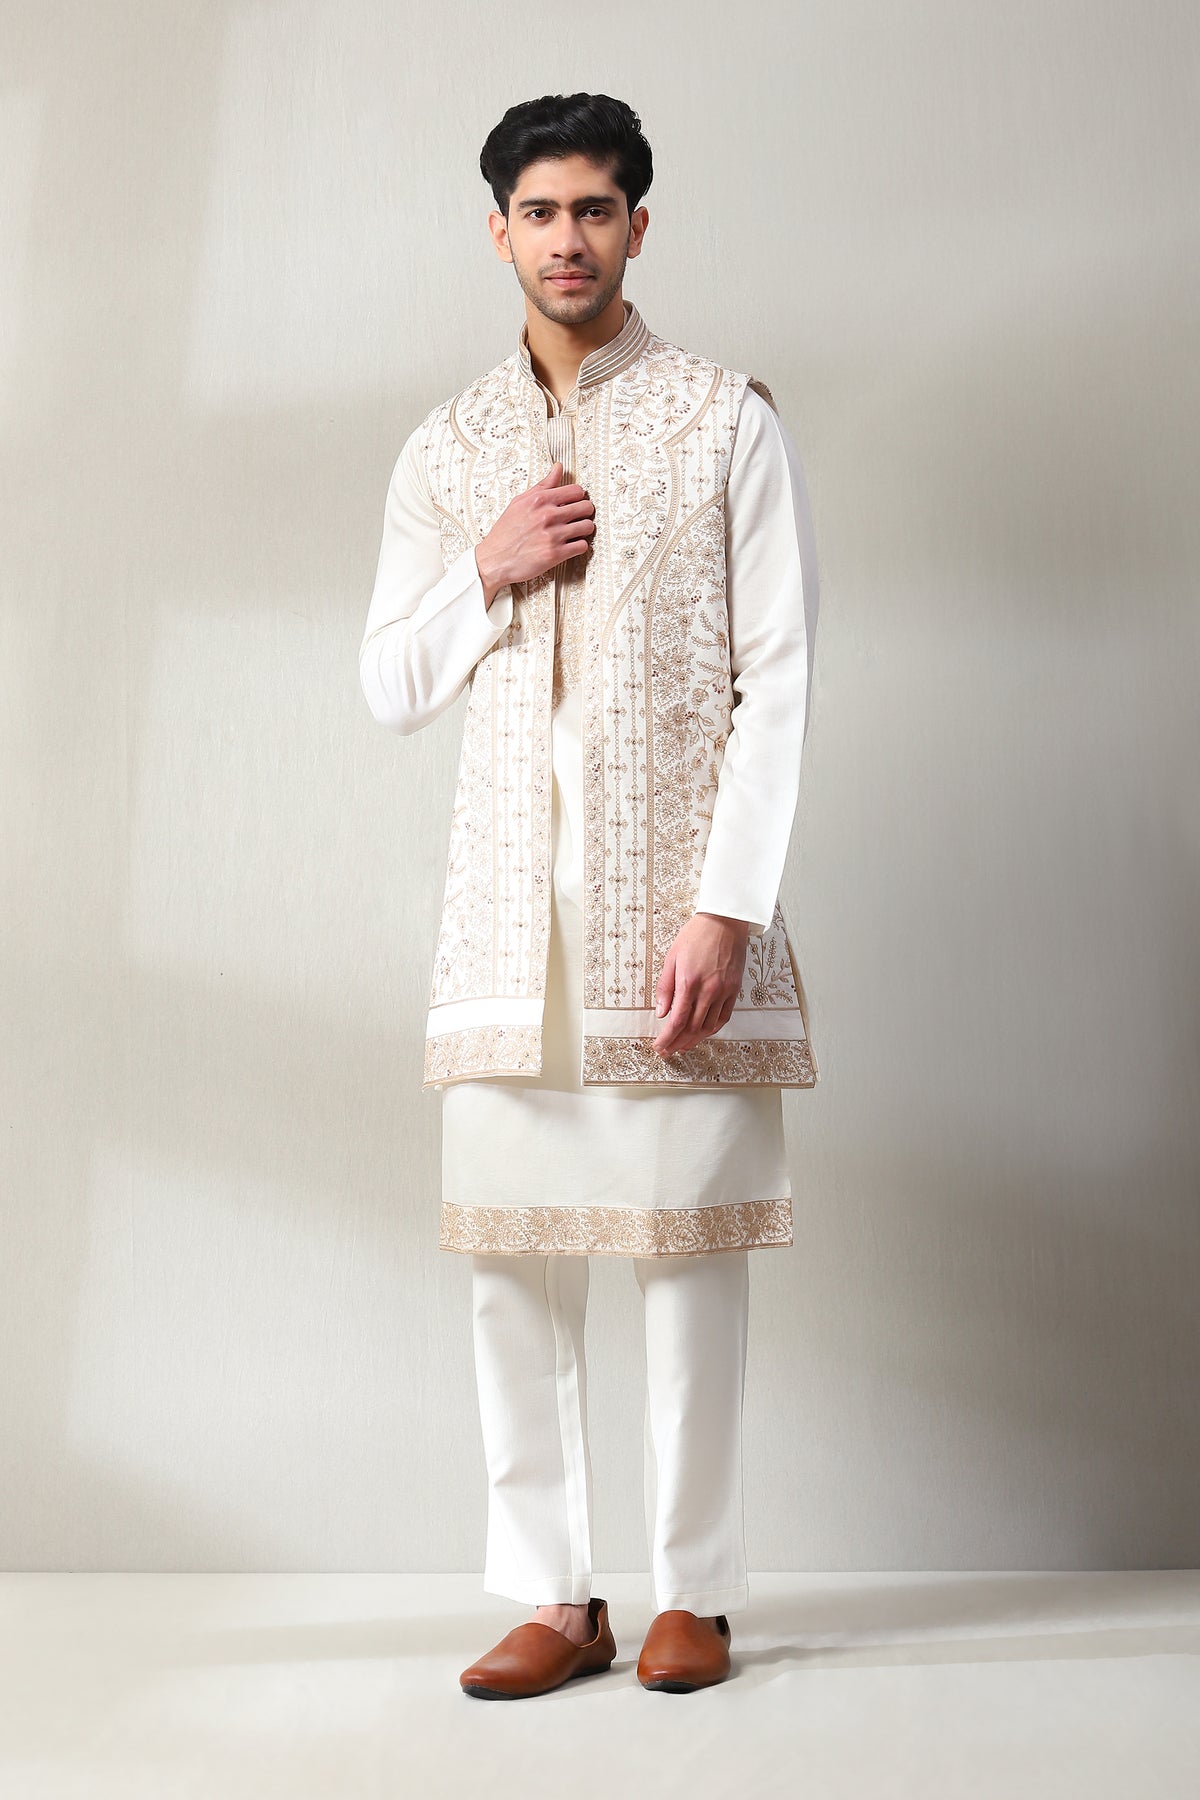 This handloom off white sleeveless jacket with the slim pants